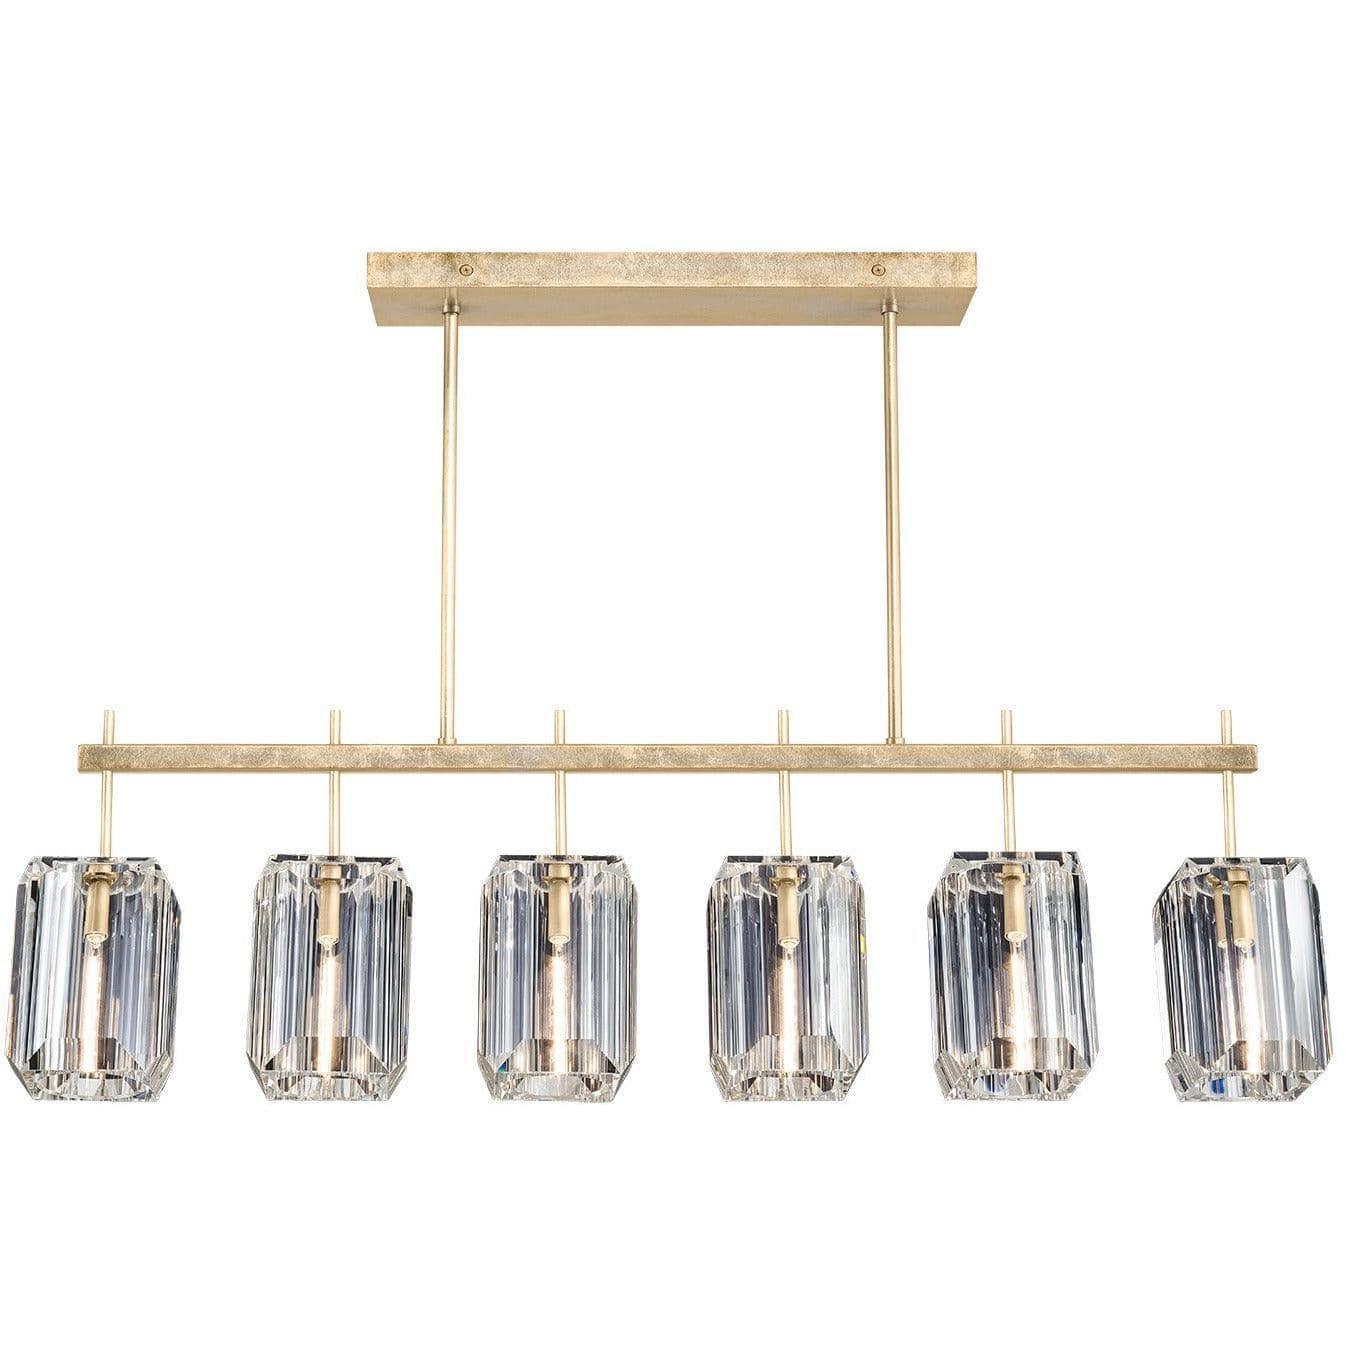 Montreal Lighting & Hardware - Monceau 46-Inch Six Light Chandelier by Fine Art Handcrafted Lighting | OPEN BOX - 875240-2ST-OB | Montreal Lighting & Hardware